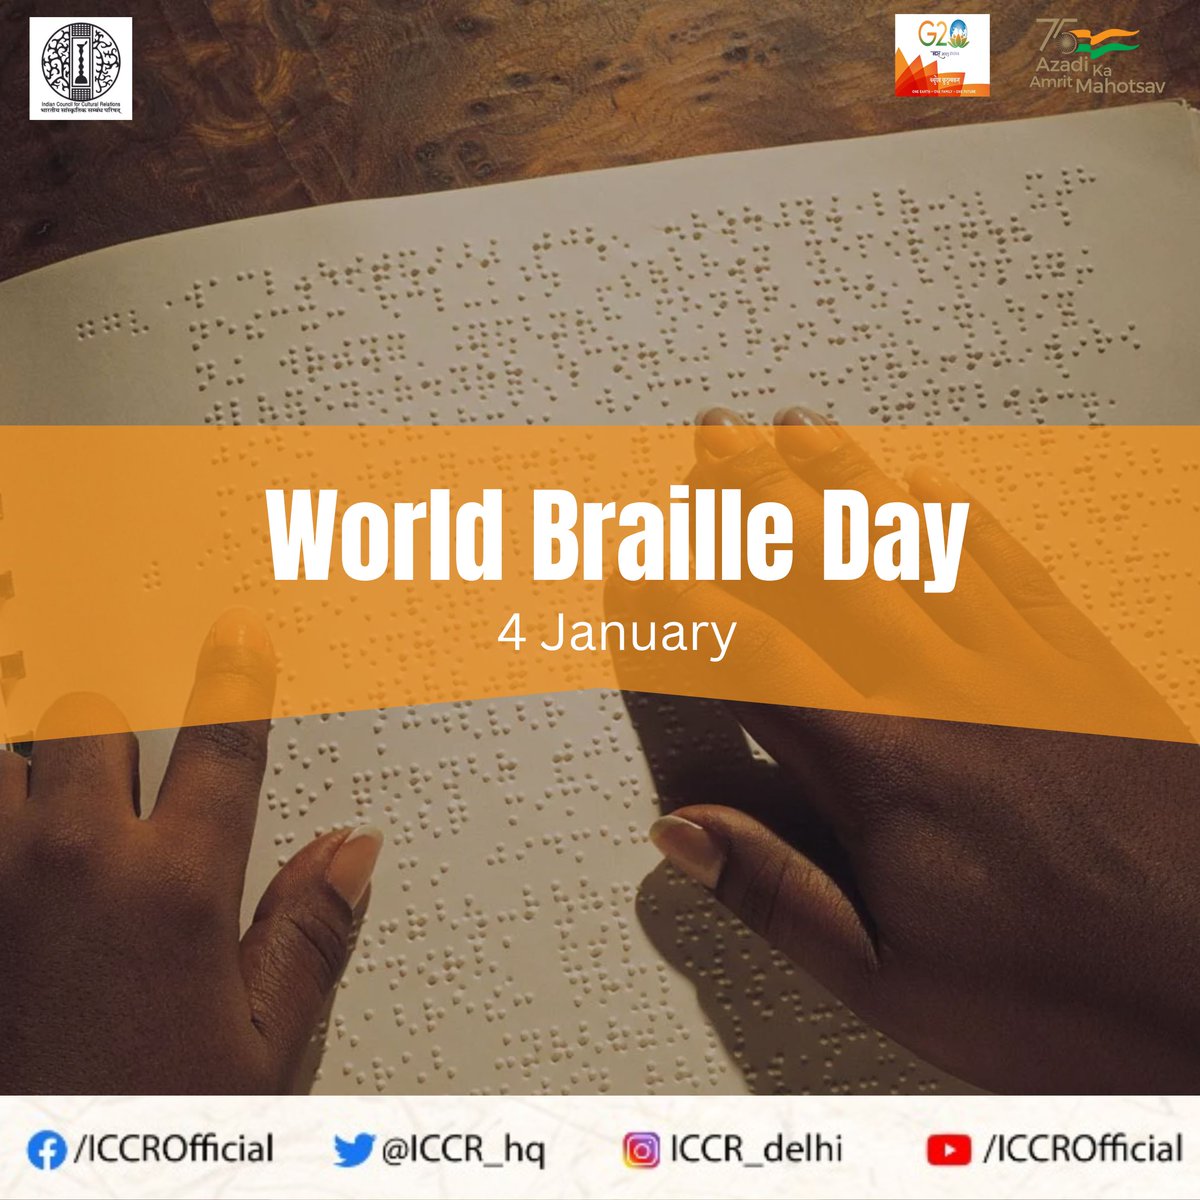 'Braille is Knowledge, and Knowledge is Power' 
-Louis Braille

ICCR observes World Braille Day to raise awareness of the importance of Braille as a means of communication. 

@ktuhinv @UN 

#Braille #WorldBrailleDay2023 #brailleday